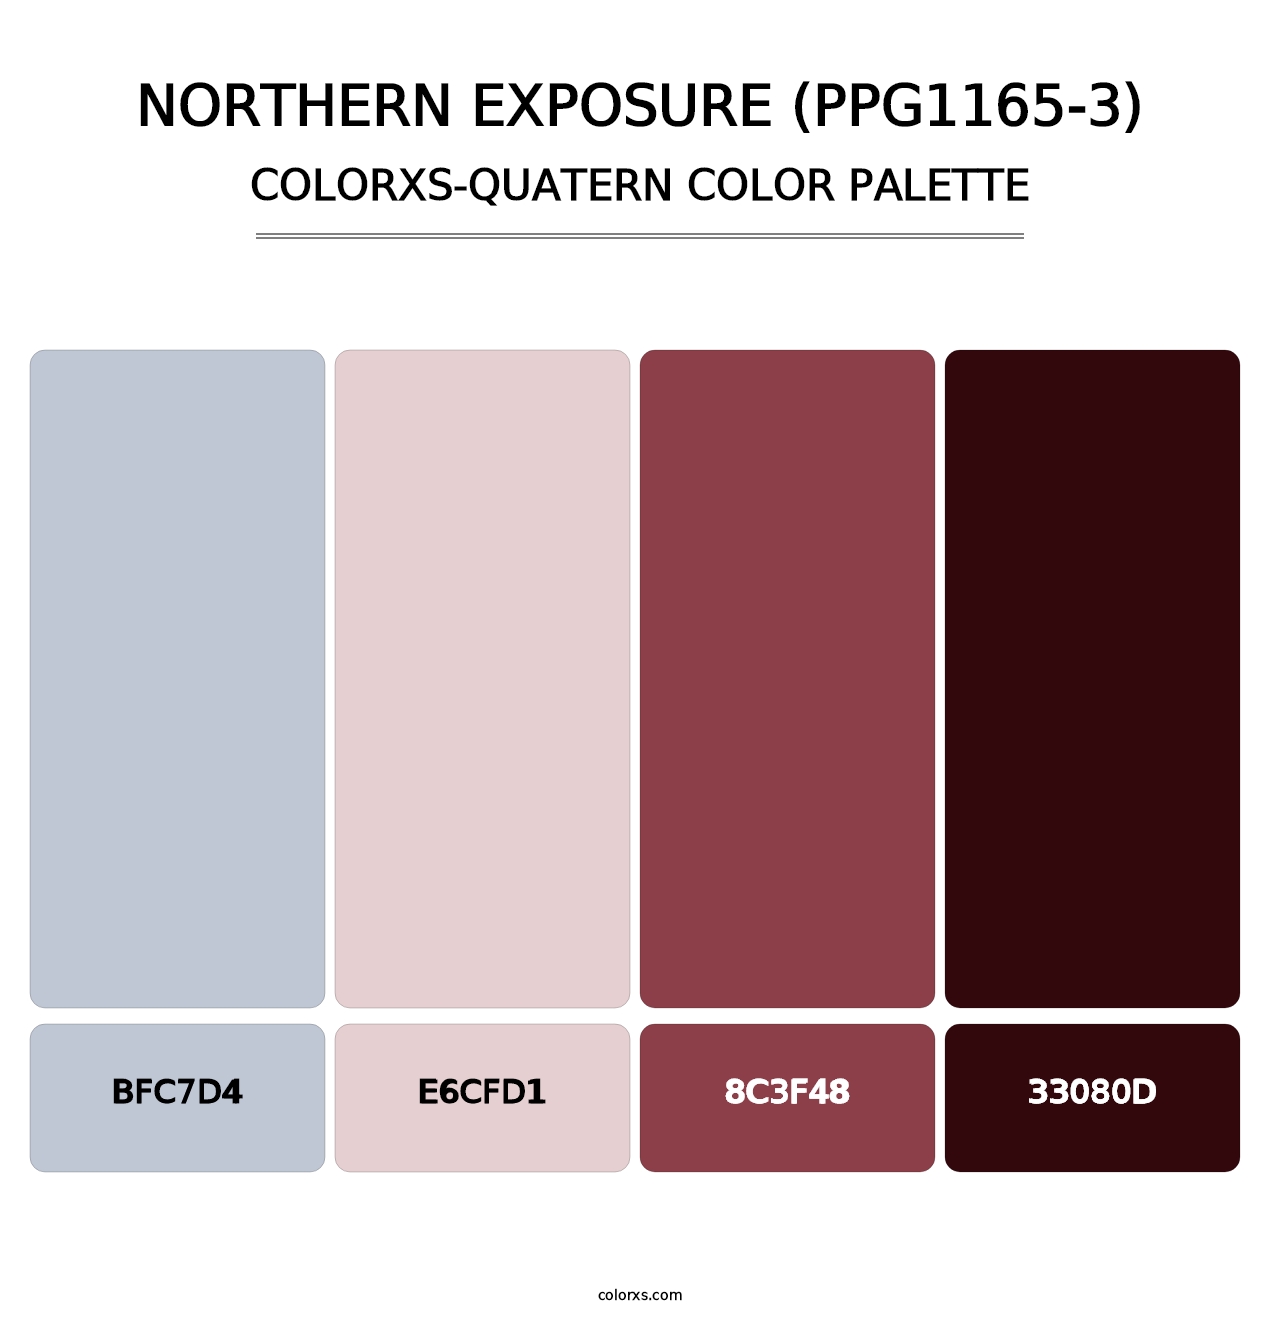 Northern Exposure (PPG1165-3) - Colorxs Quatern Palette